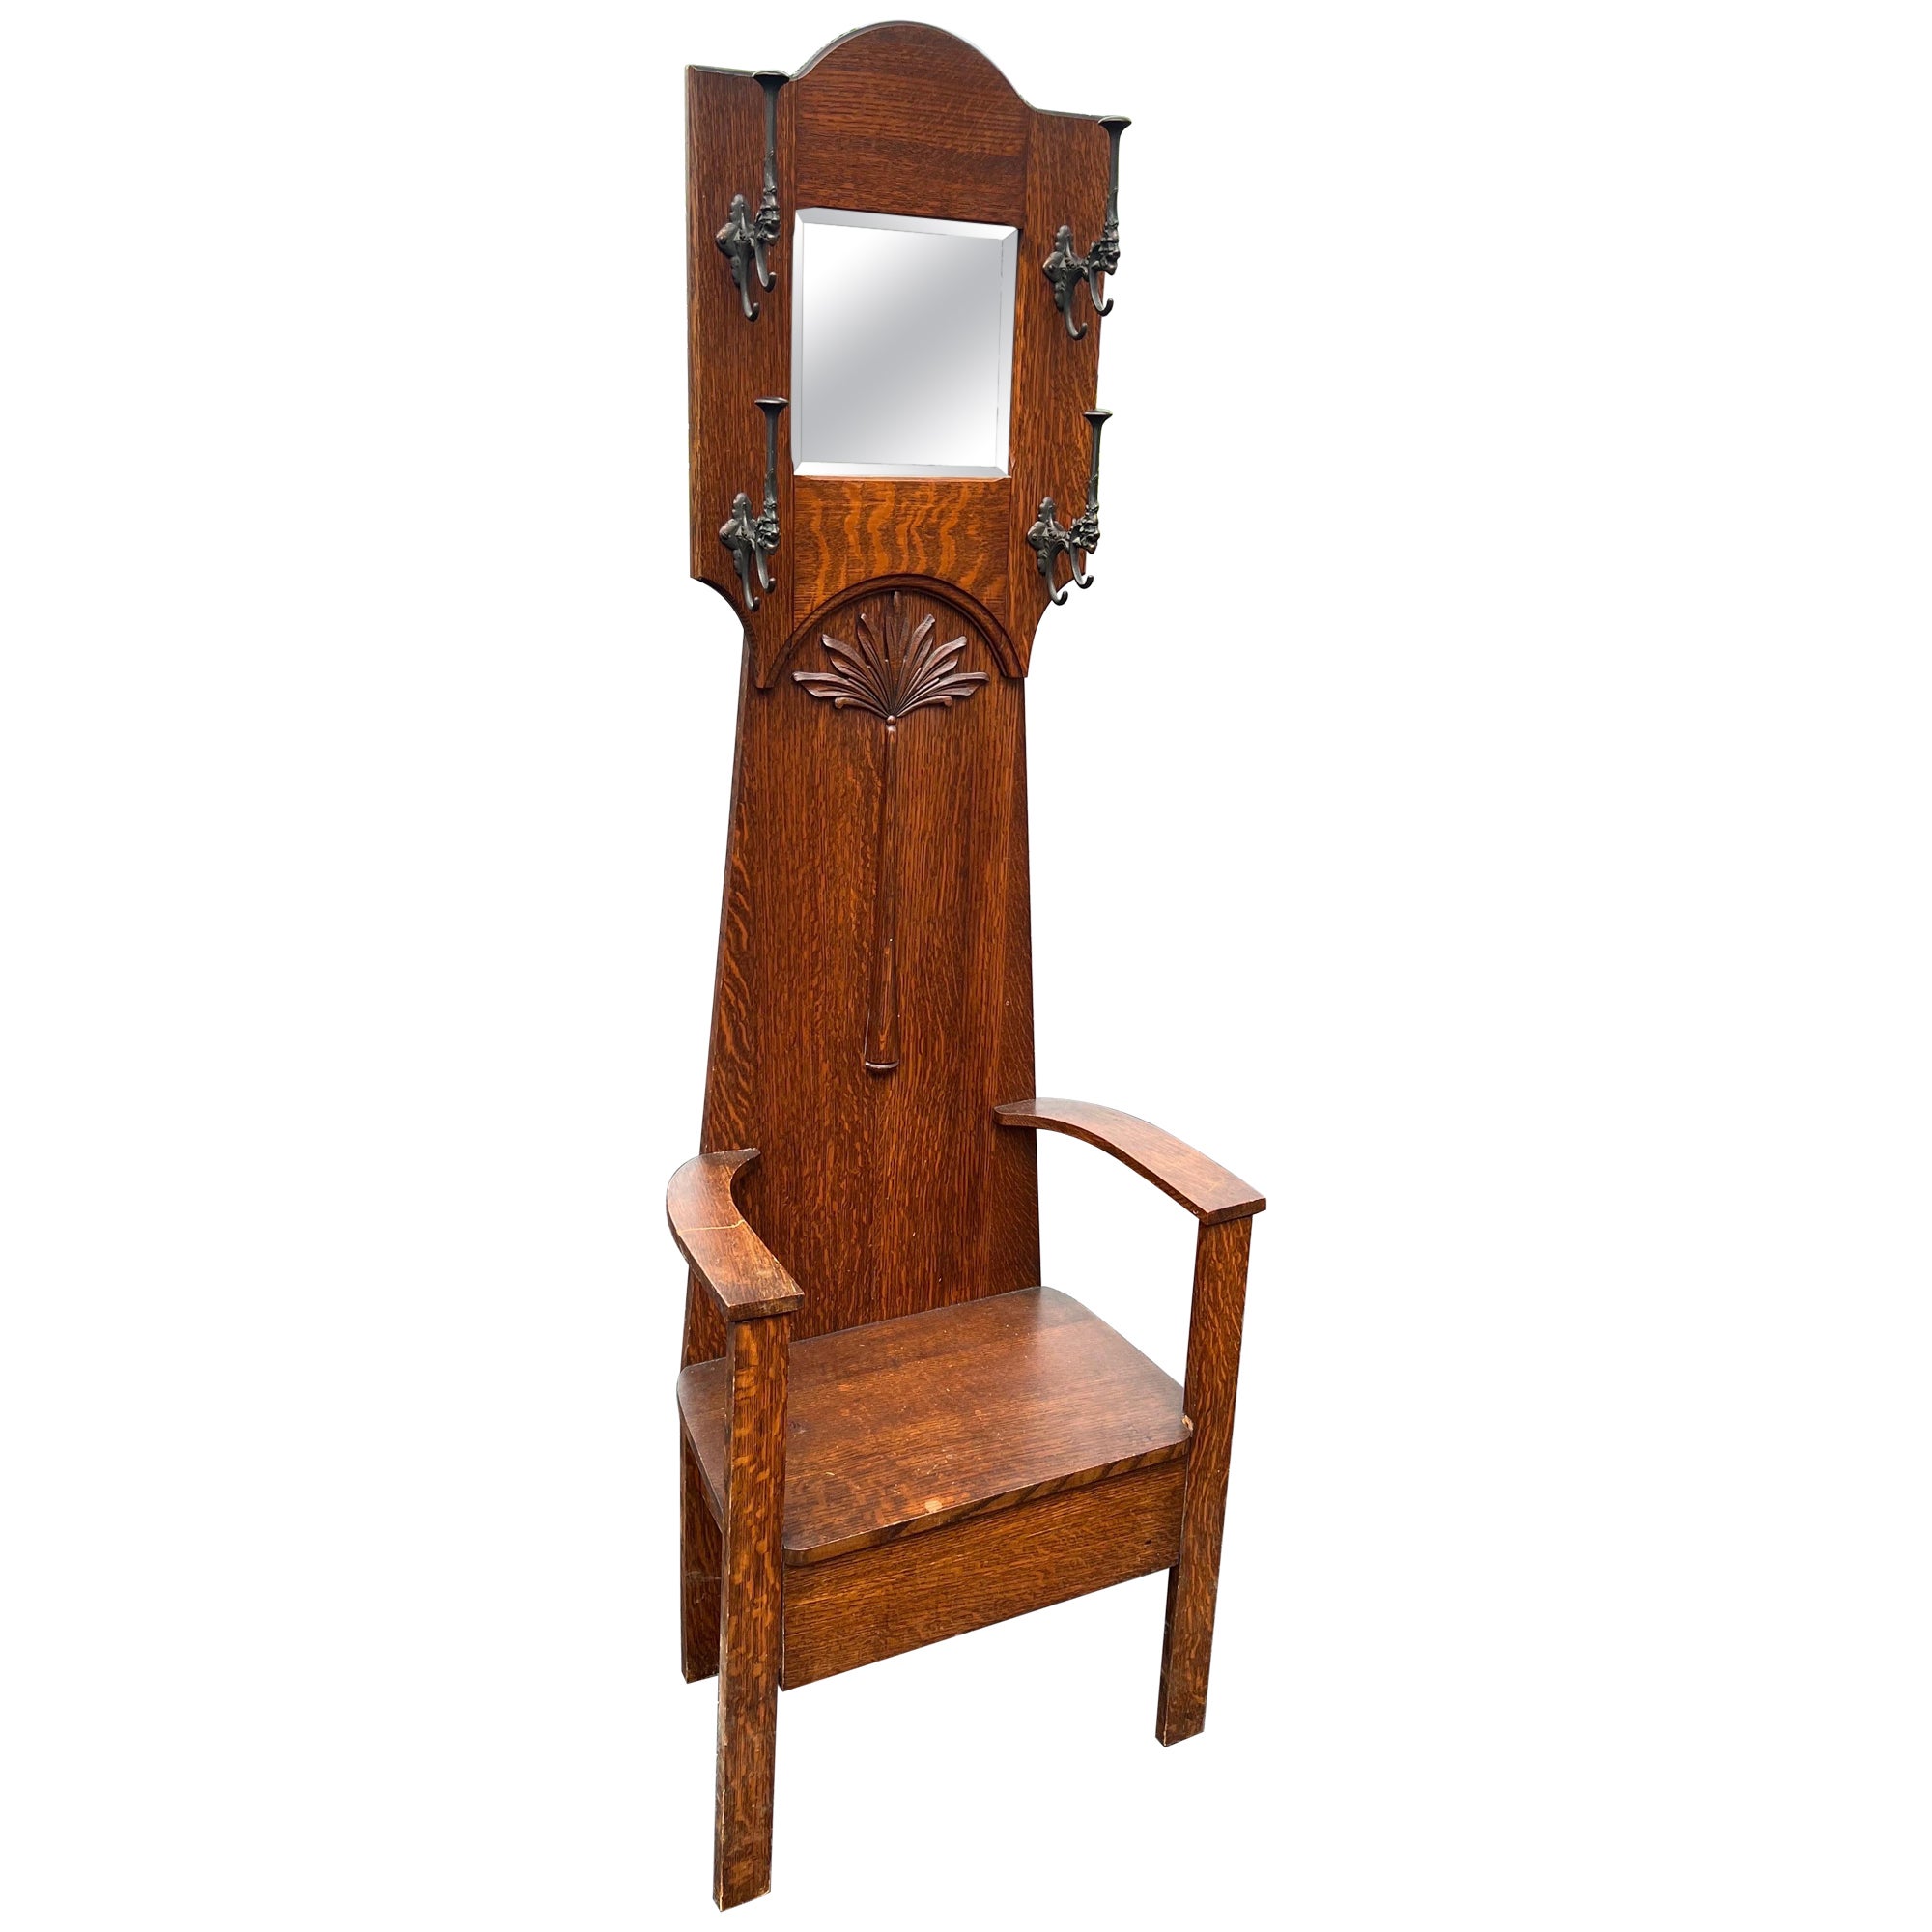 Antique Oak Hall Tree Chair with Mirror